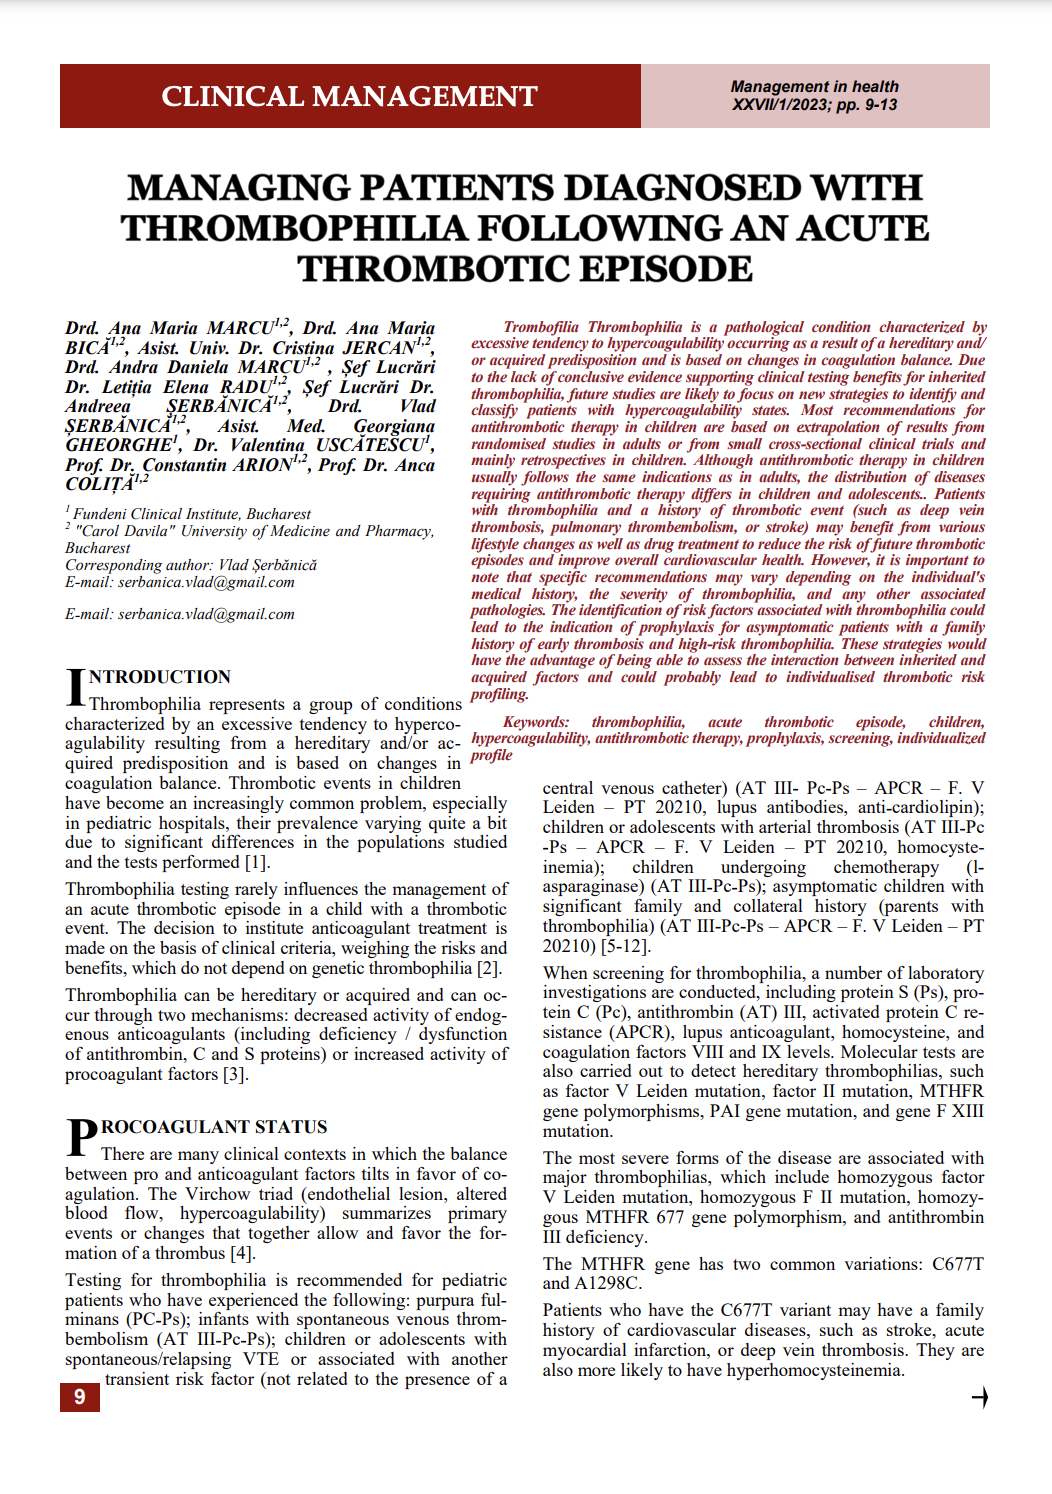 Managing patients diagnosed with thrombophilia following an acute thrombotic episode 